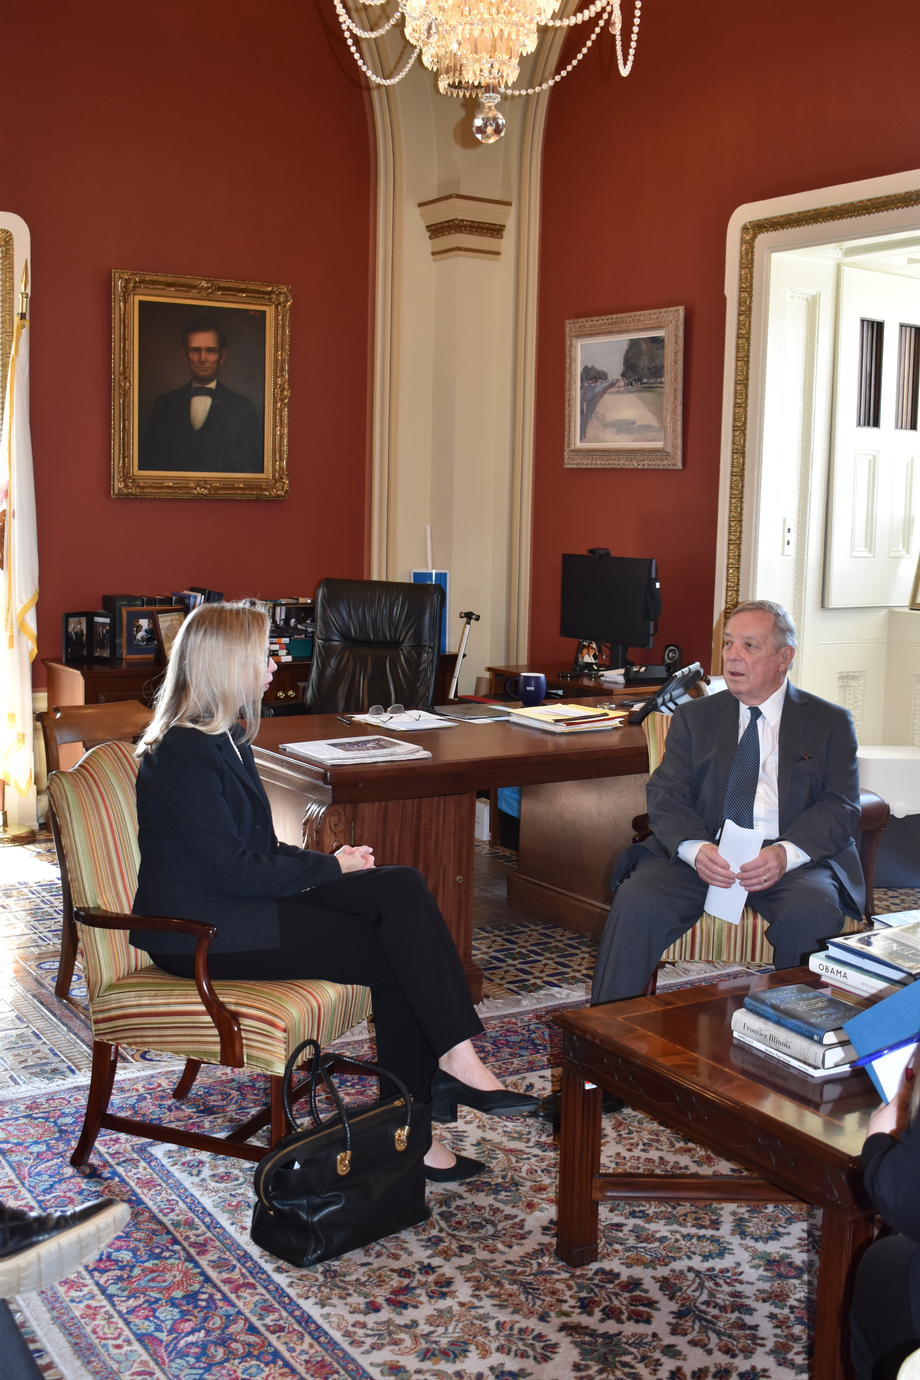 DURBIN MEETS WITH PRESIDENT BIDEN’S NOMINEE TO BE THE U.S. AMBASSADOR TO LITHUANIA